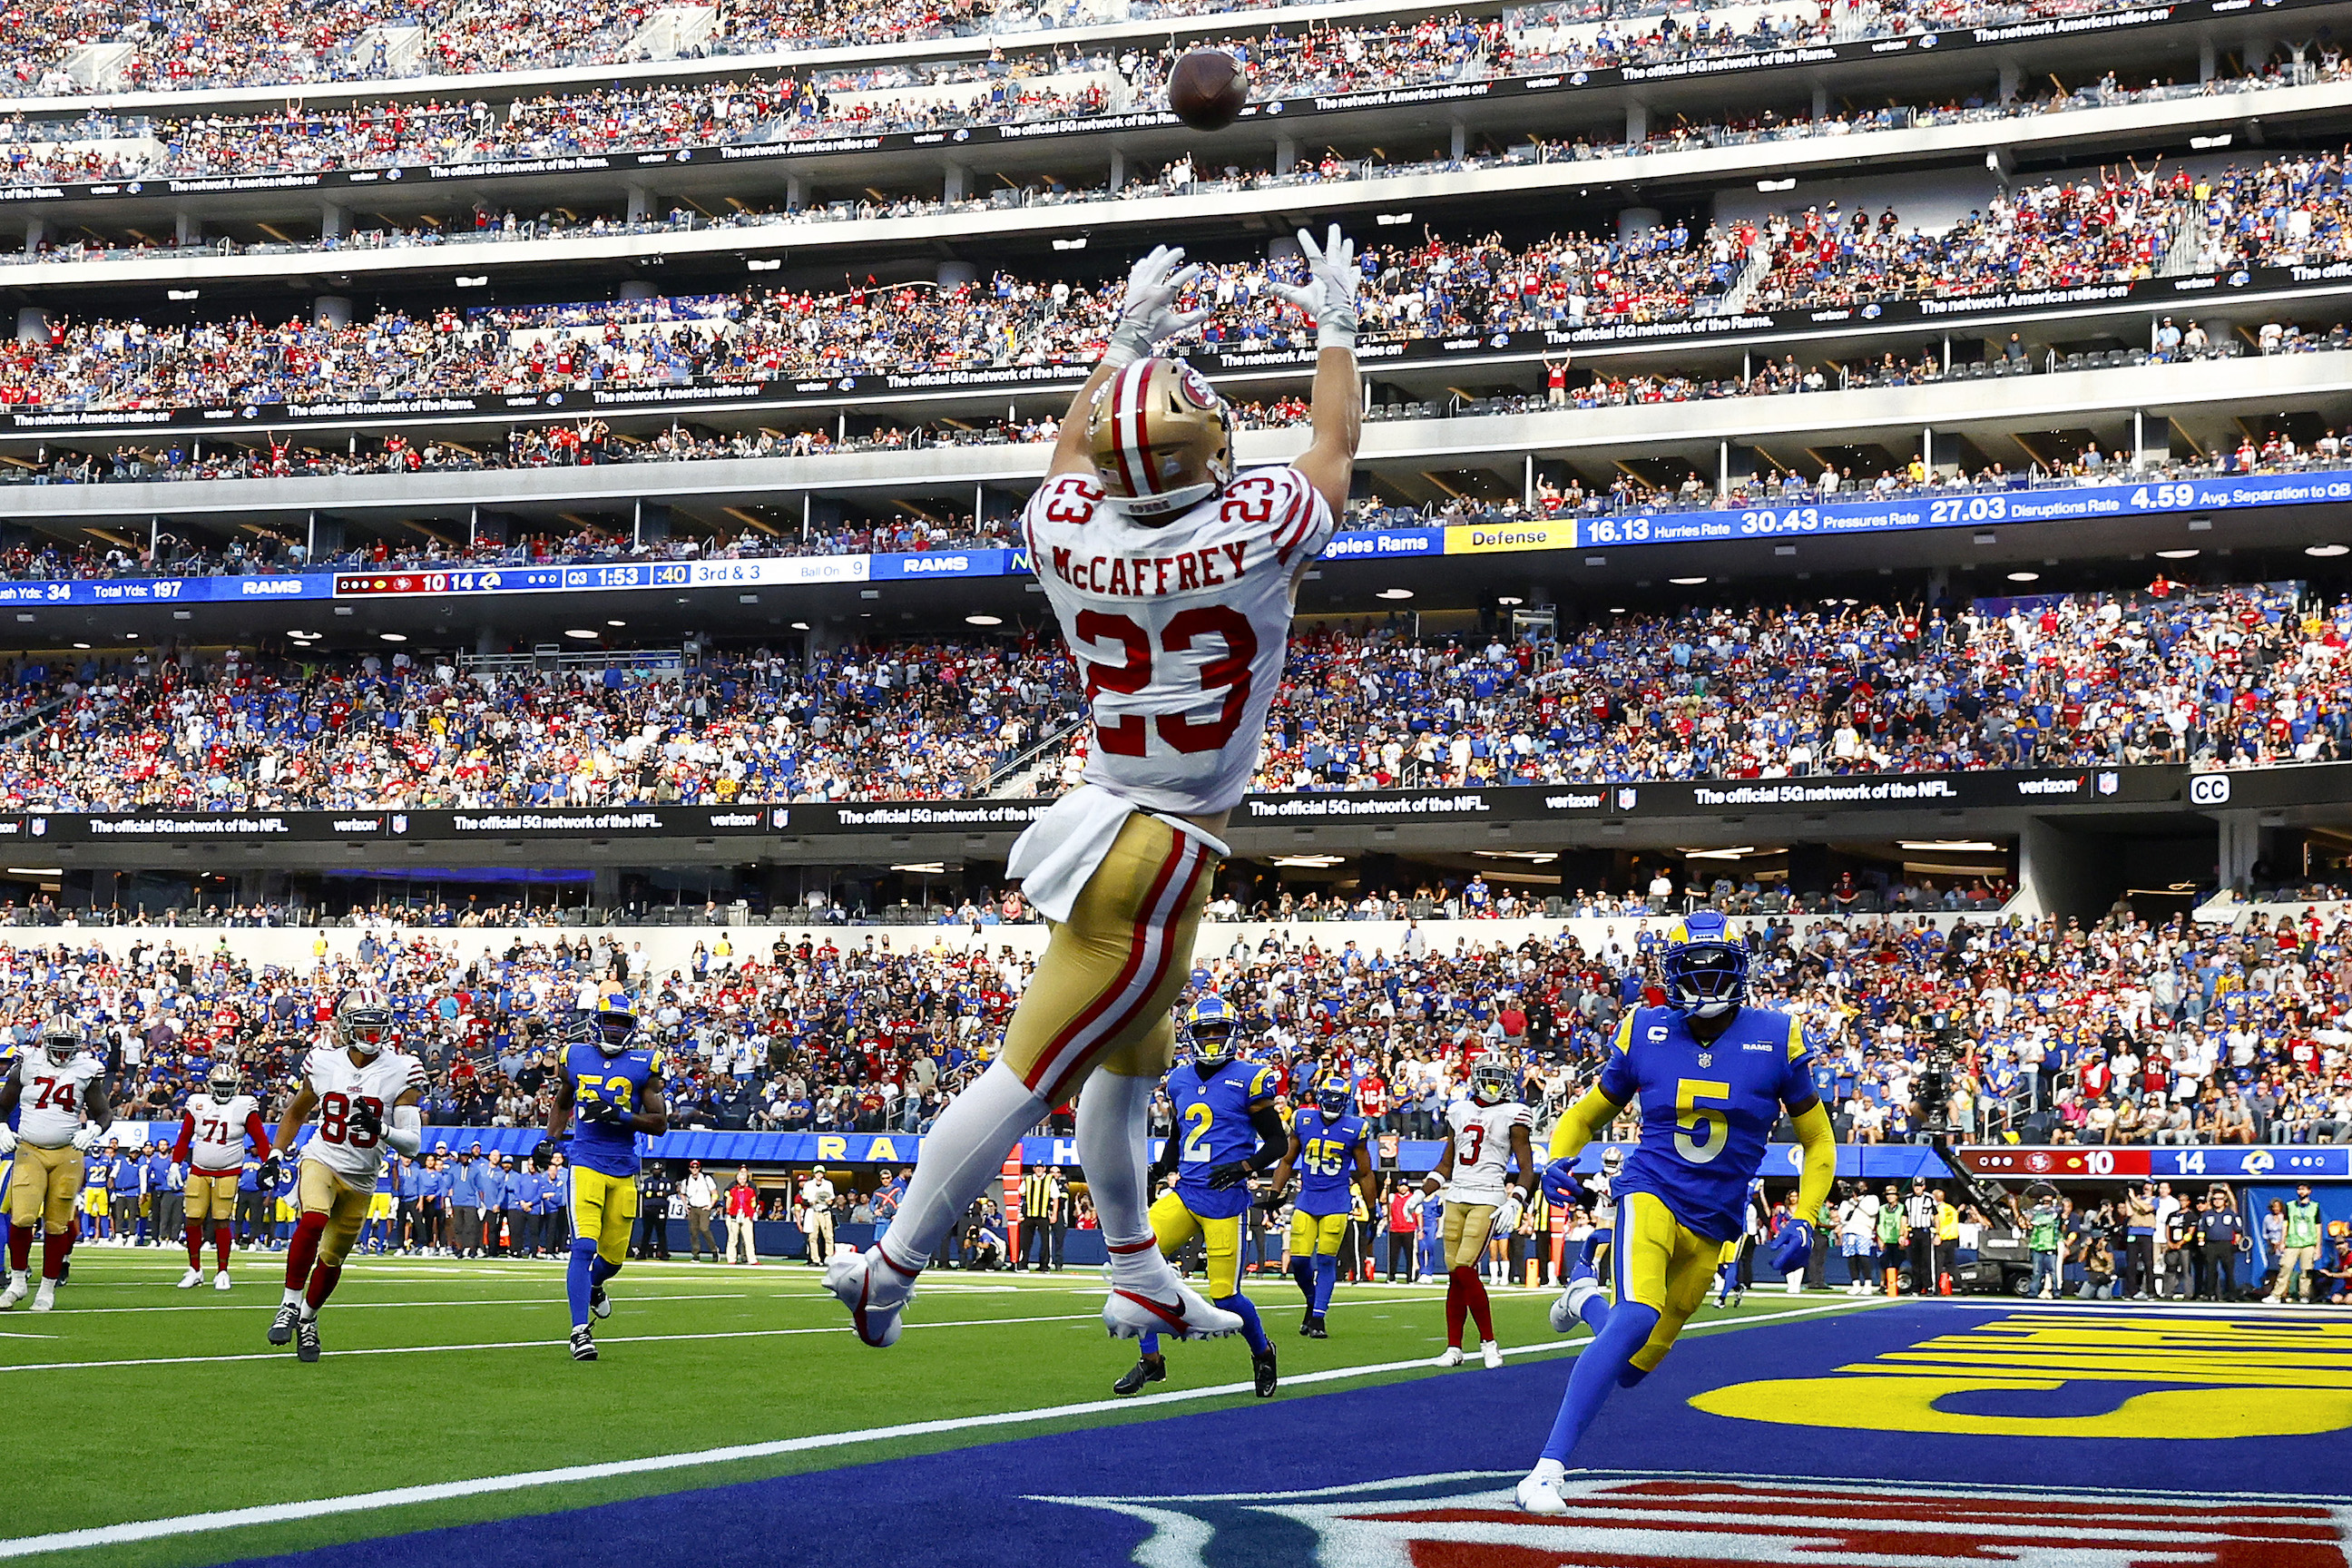 McCaffrey Throws, Catches, Rushes for TDs, Niners Rout Rams